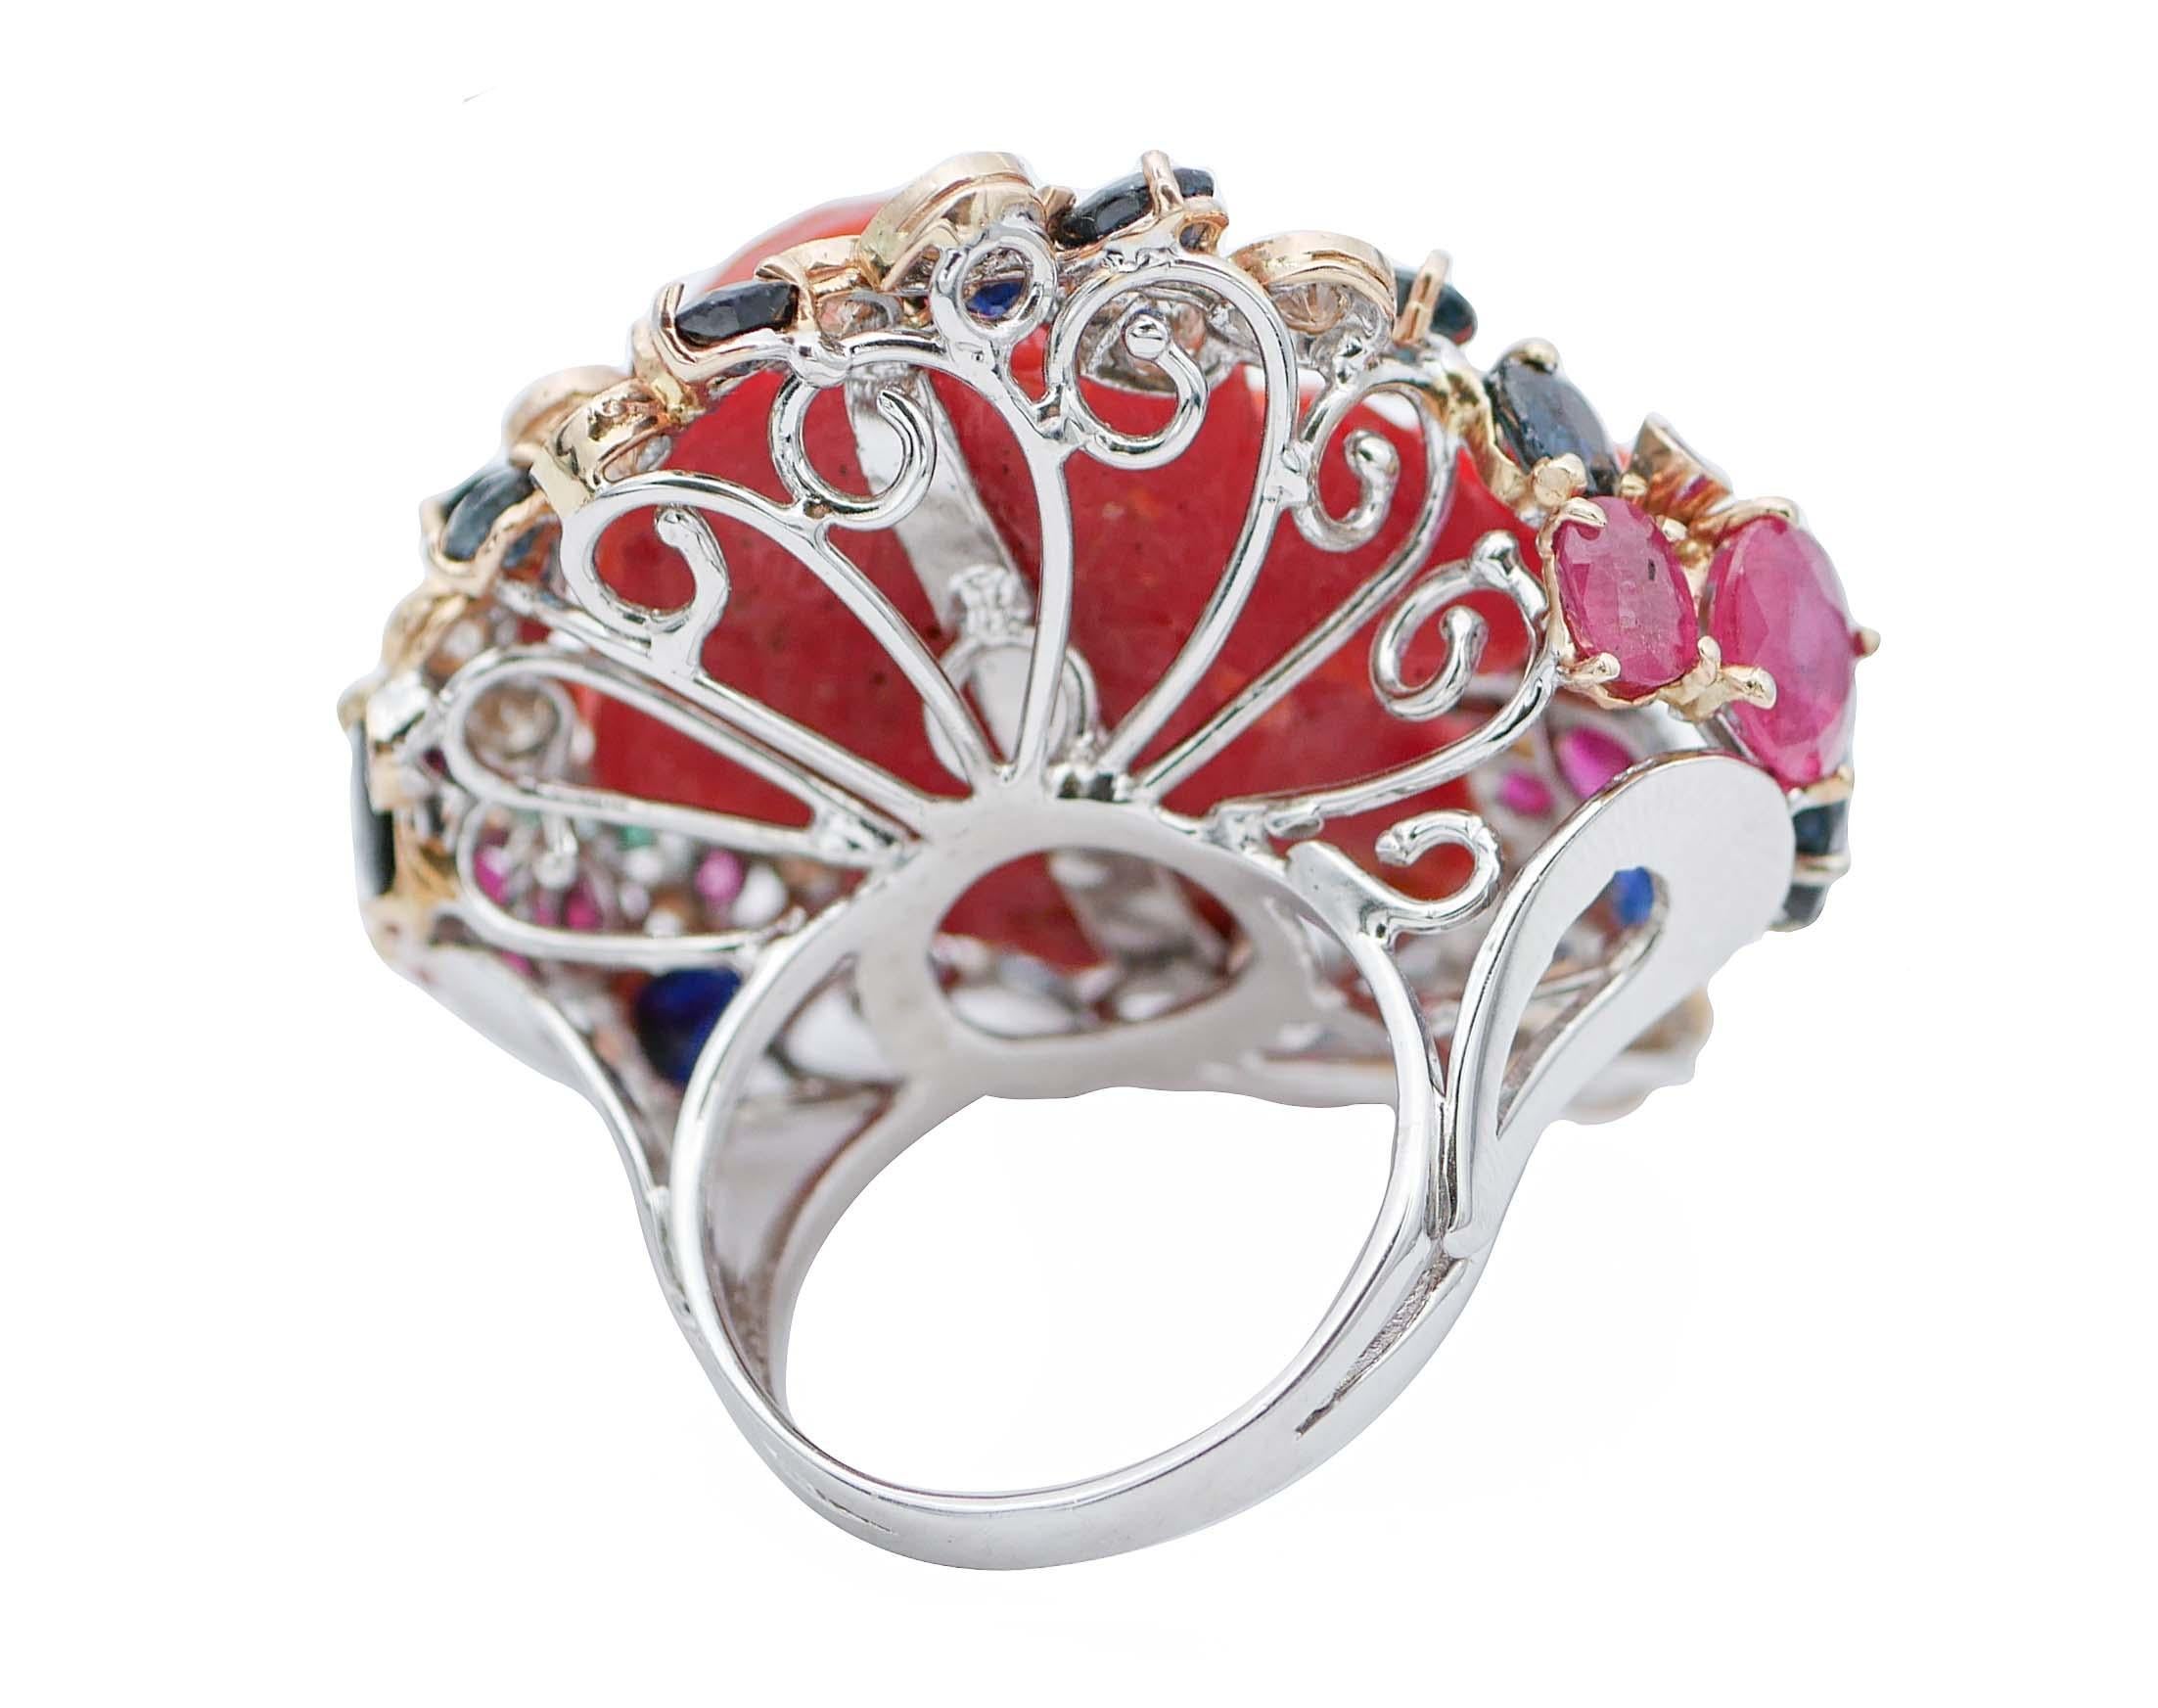 Retro Coral, Sapphires, Rubies, Emeralds, Diamonds, 14 Karat White and Rose Gold Ring For Sale